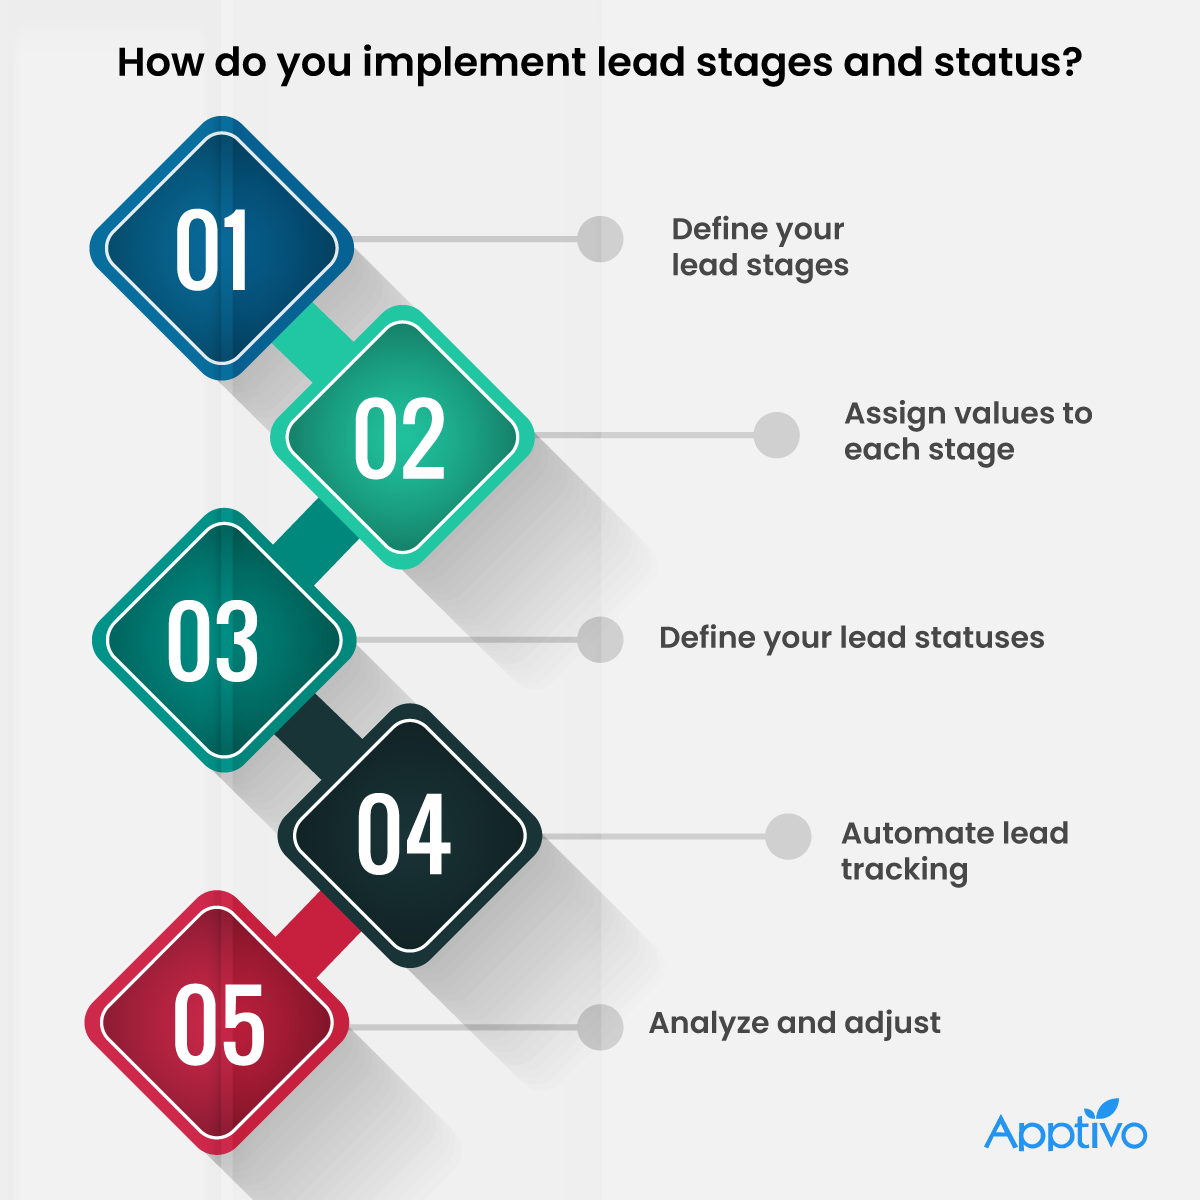 How do you implement lead stages and status?